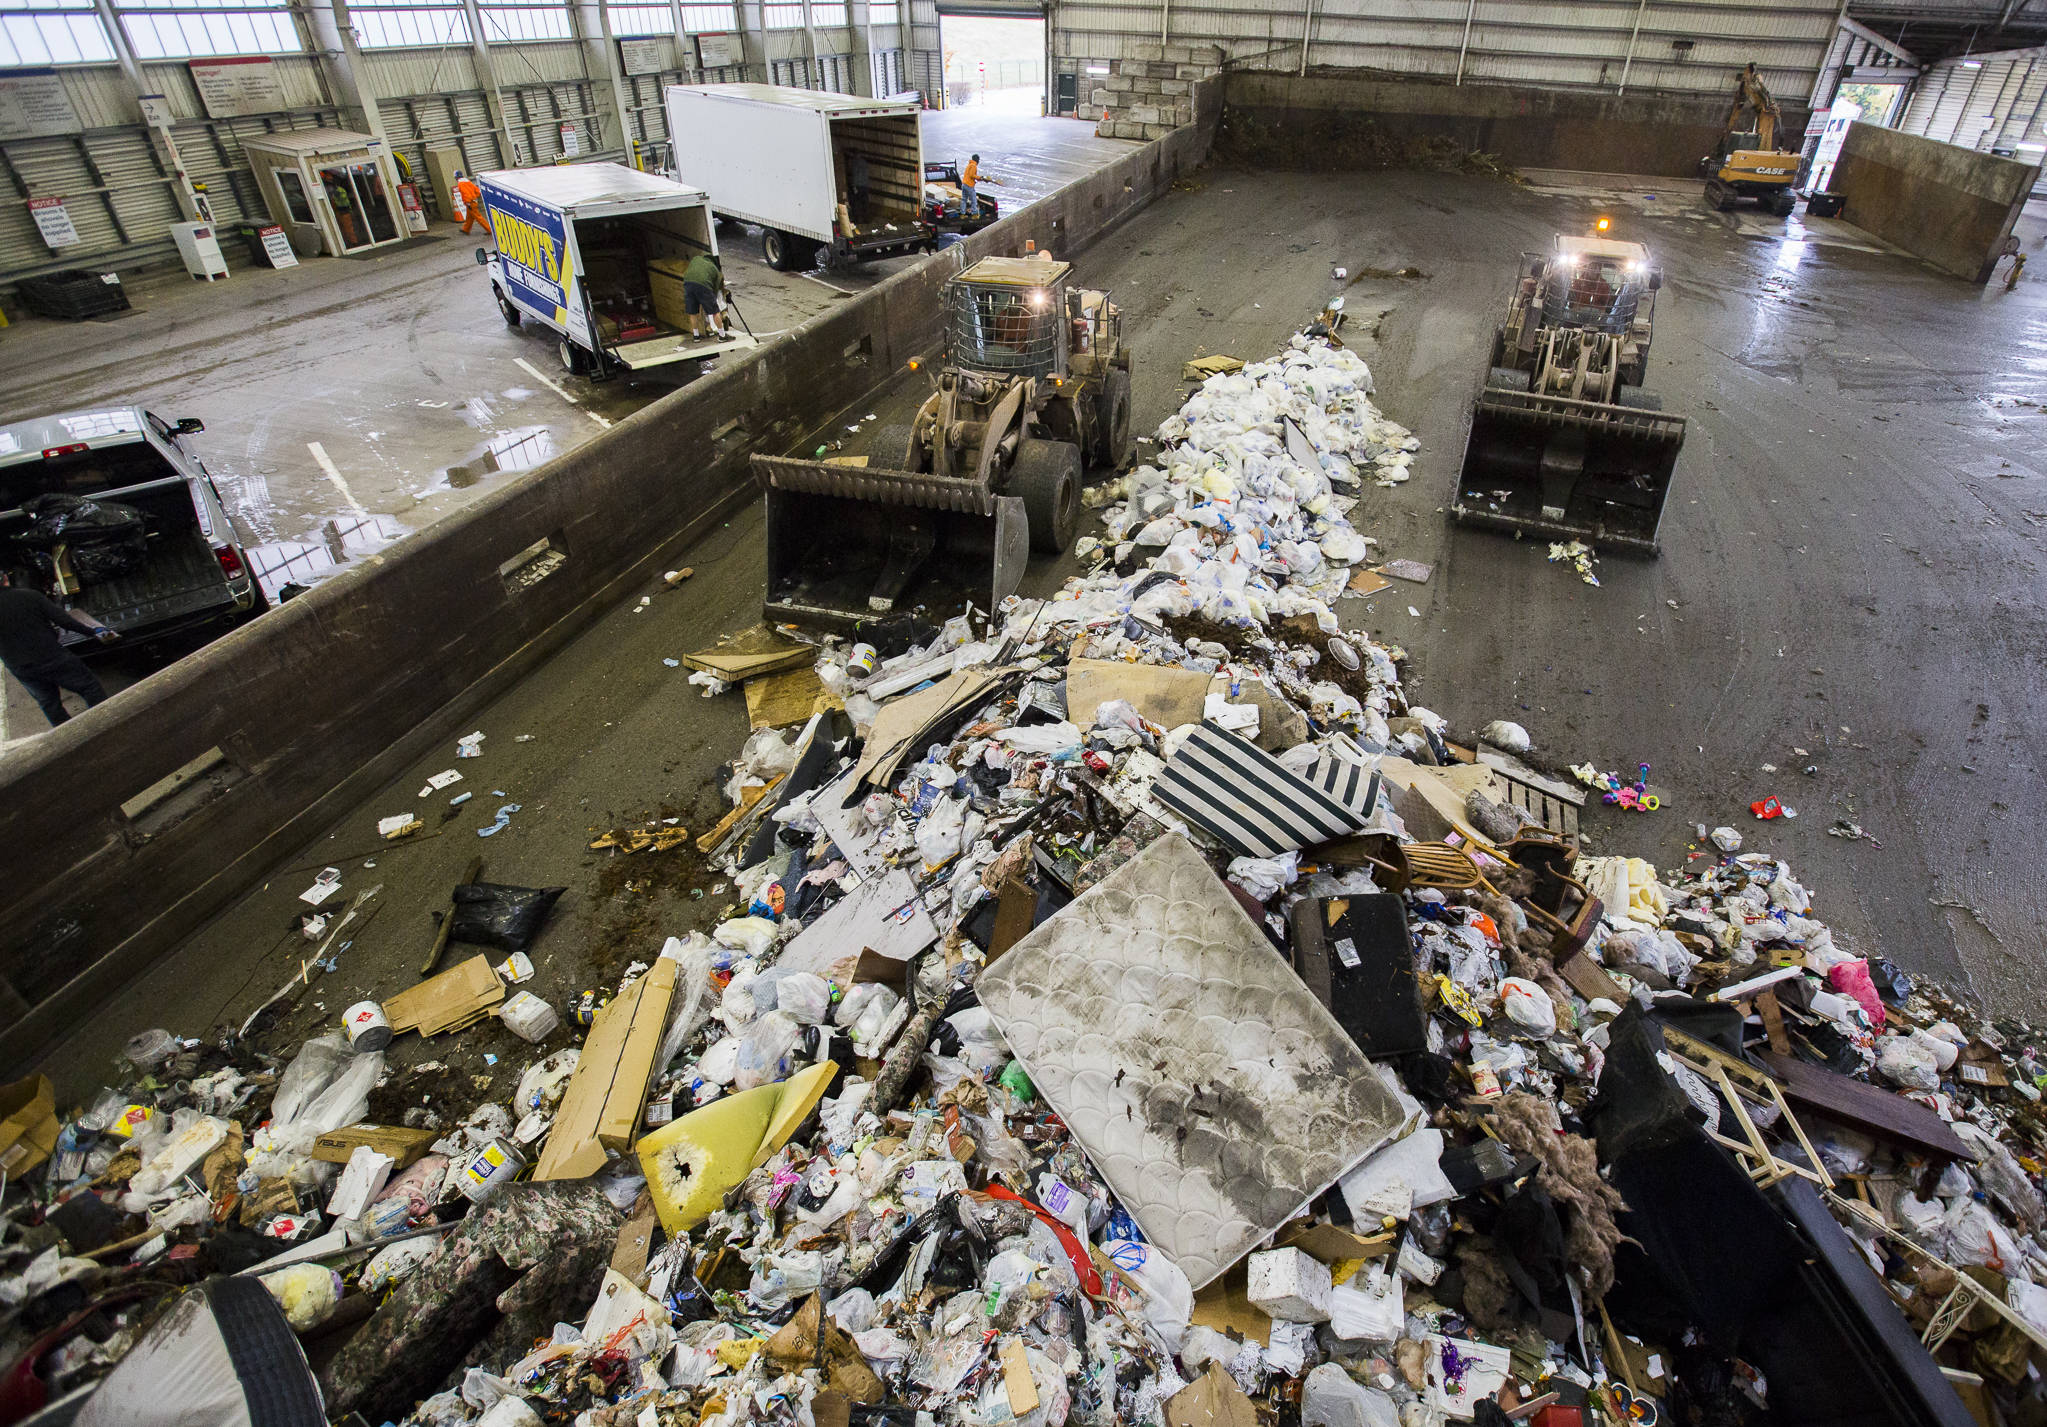 Front loaders push trash forward into one of the compactors at the Airport Road Recycling Transfer Station on Nov. 24 in Everett. Photo by Olivia Vanni/The Herald (Everett)